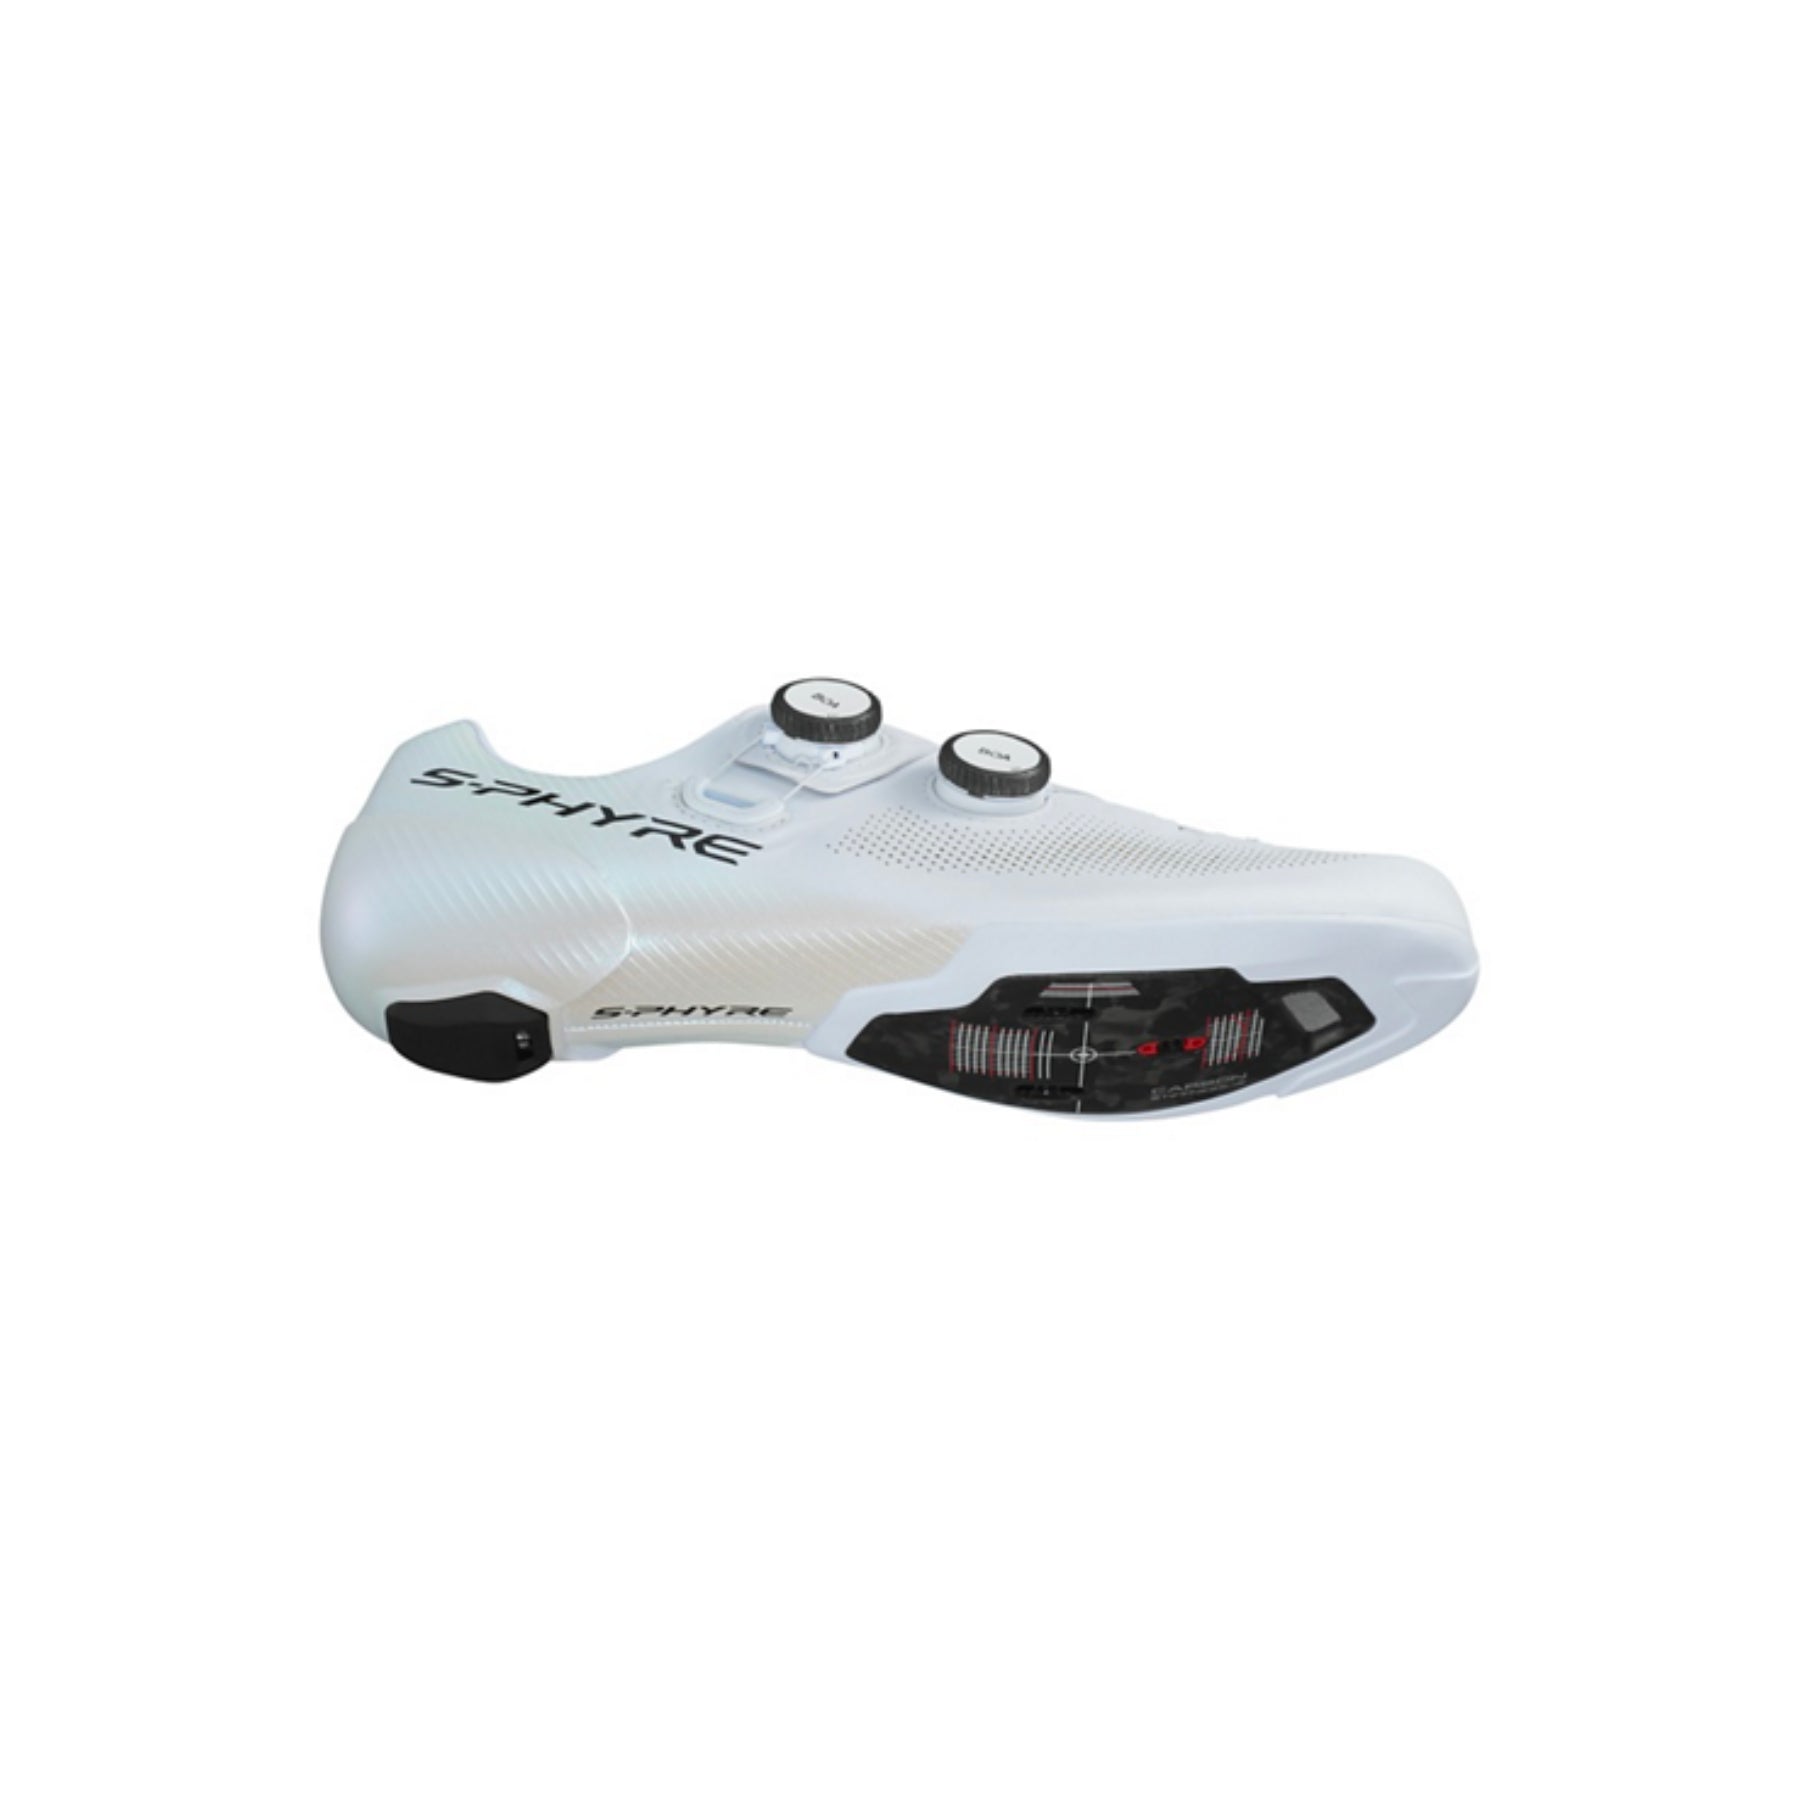 Shimano RC903 S-Phyre-White